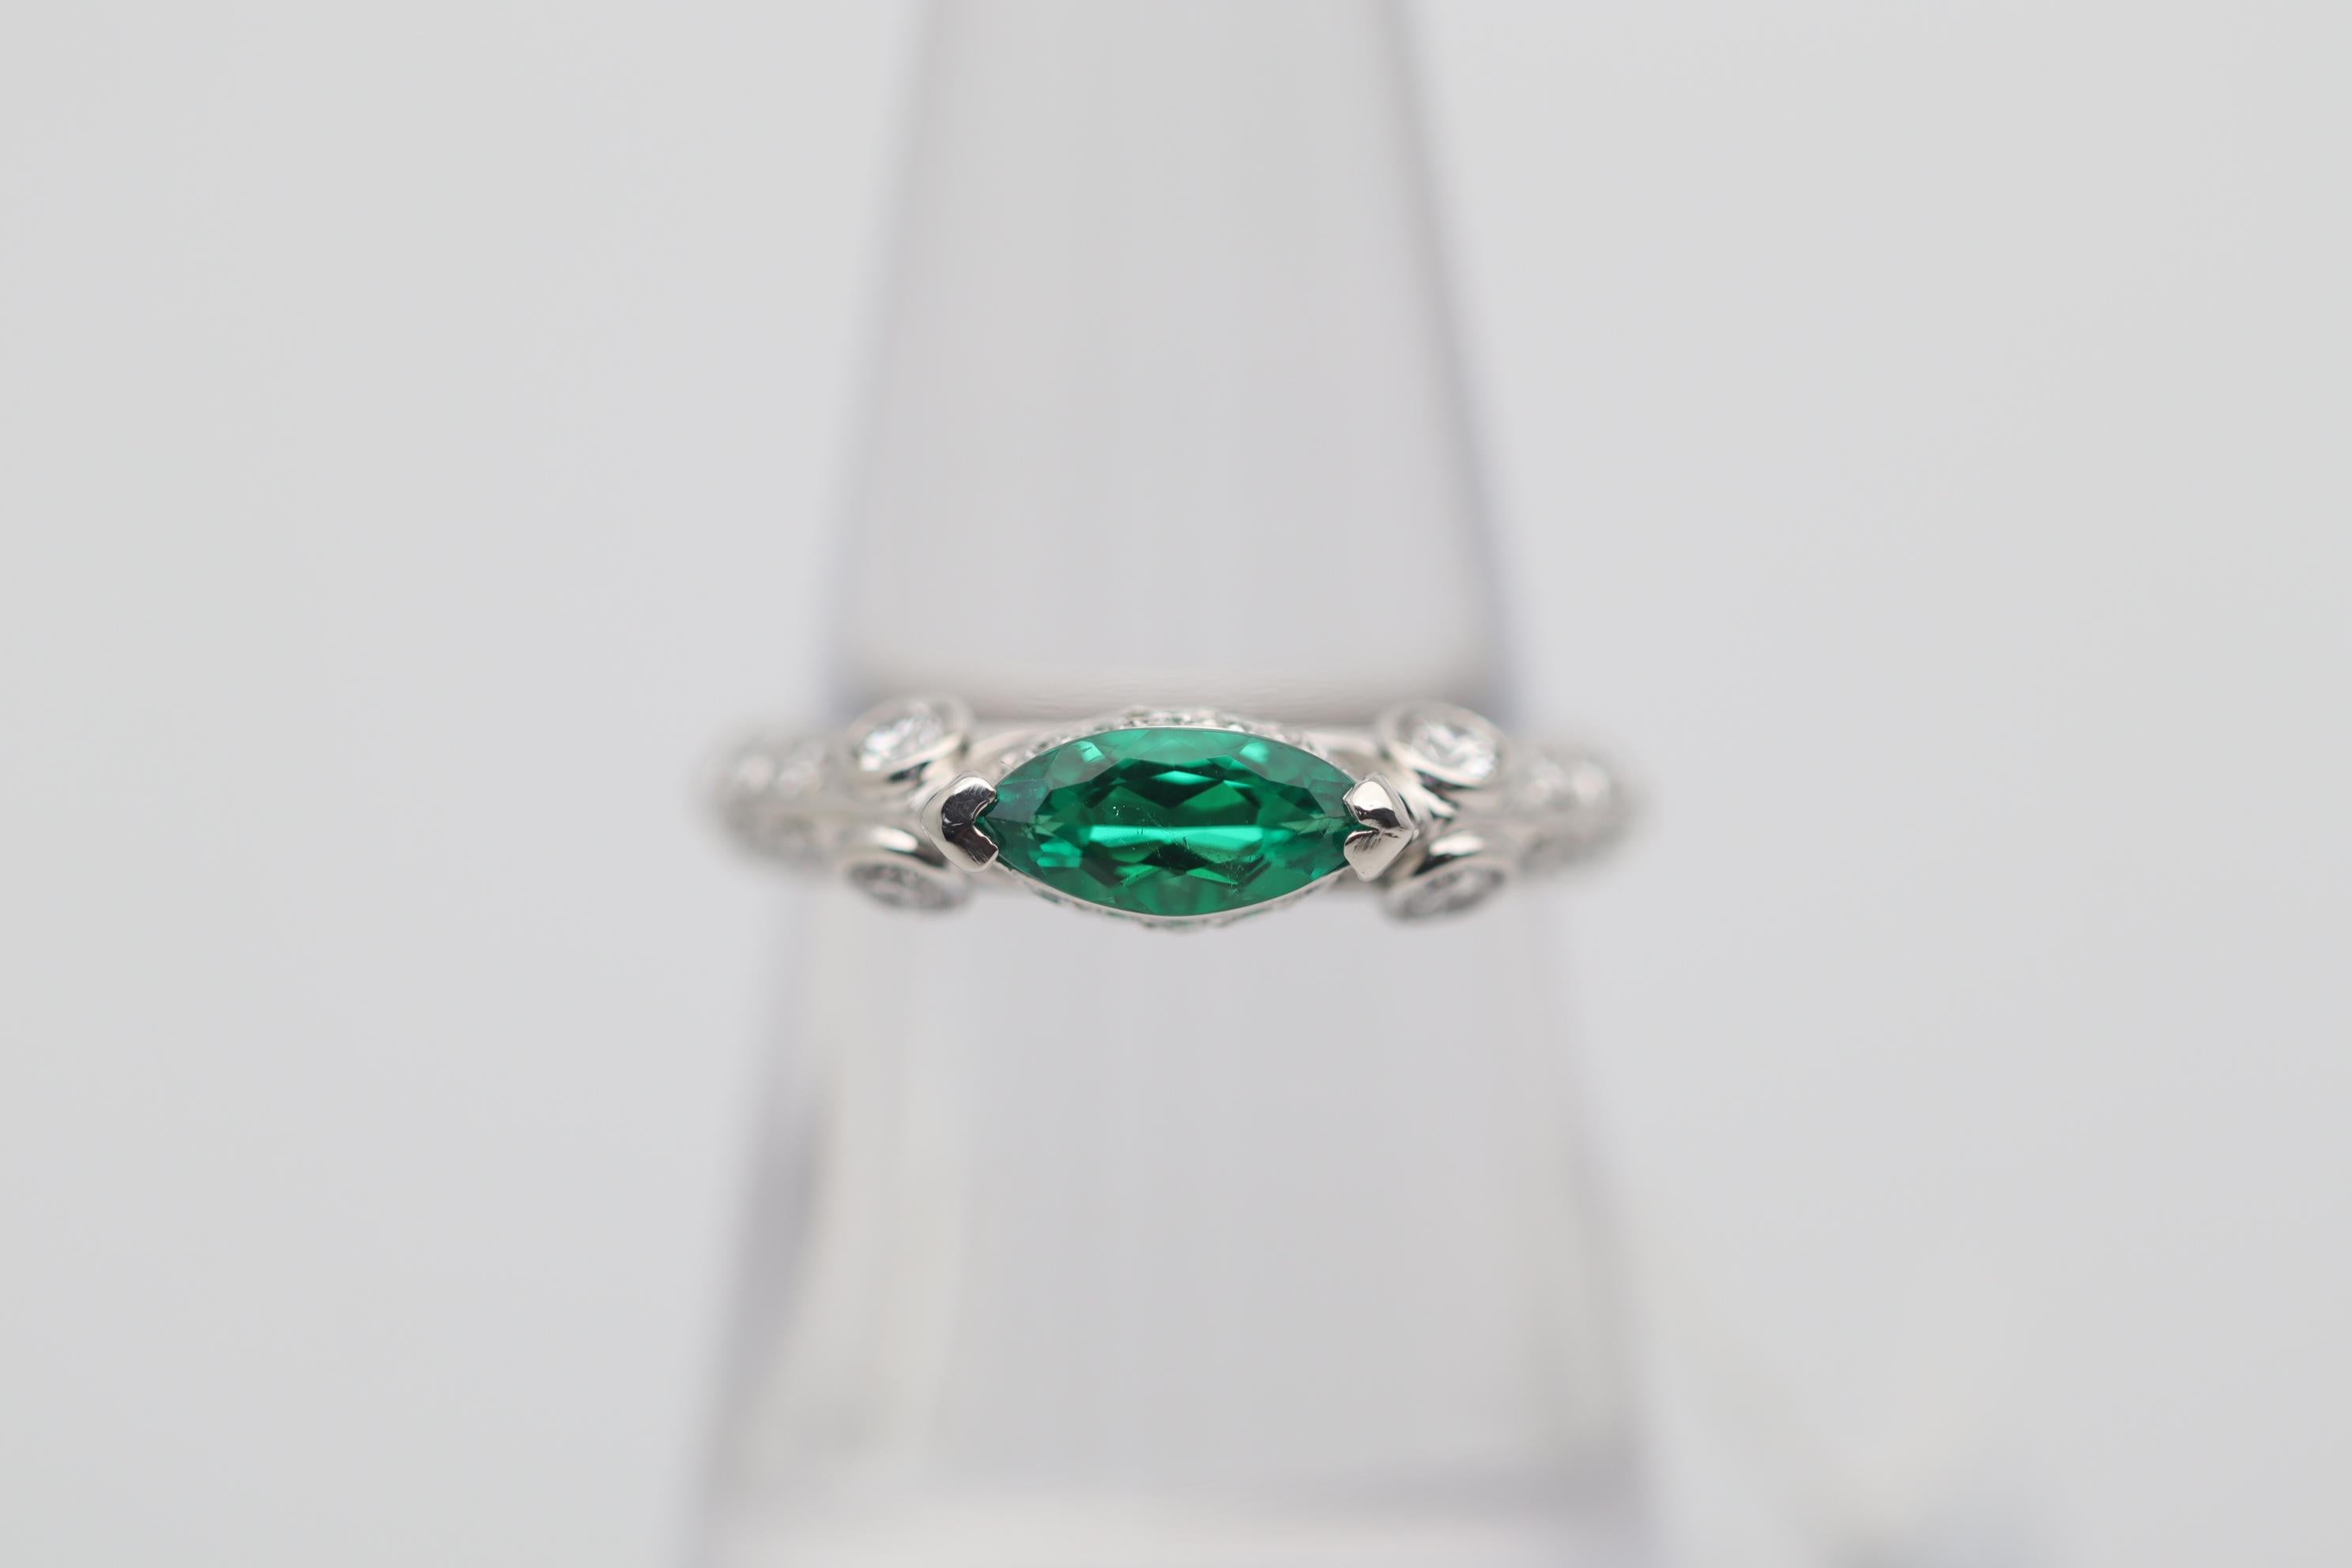 A sleek and sexy platinum ring featuring a 0.47 carat marquise shape emerald. It has a rich and fine vivid grass green color that pops. It is complemented by 0.56 carats of round brilliant-cut diamonds set around the ring adding brilliance and